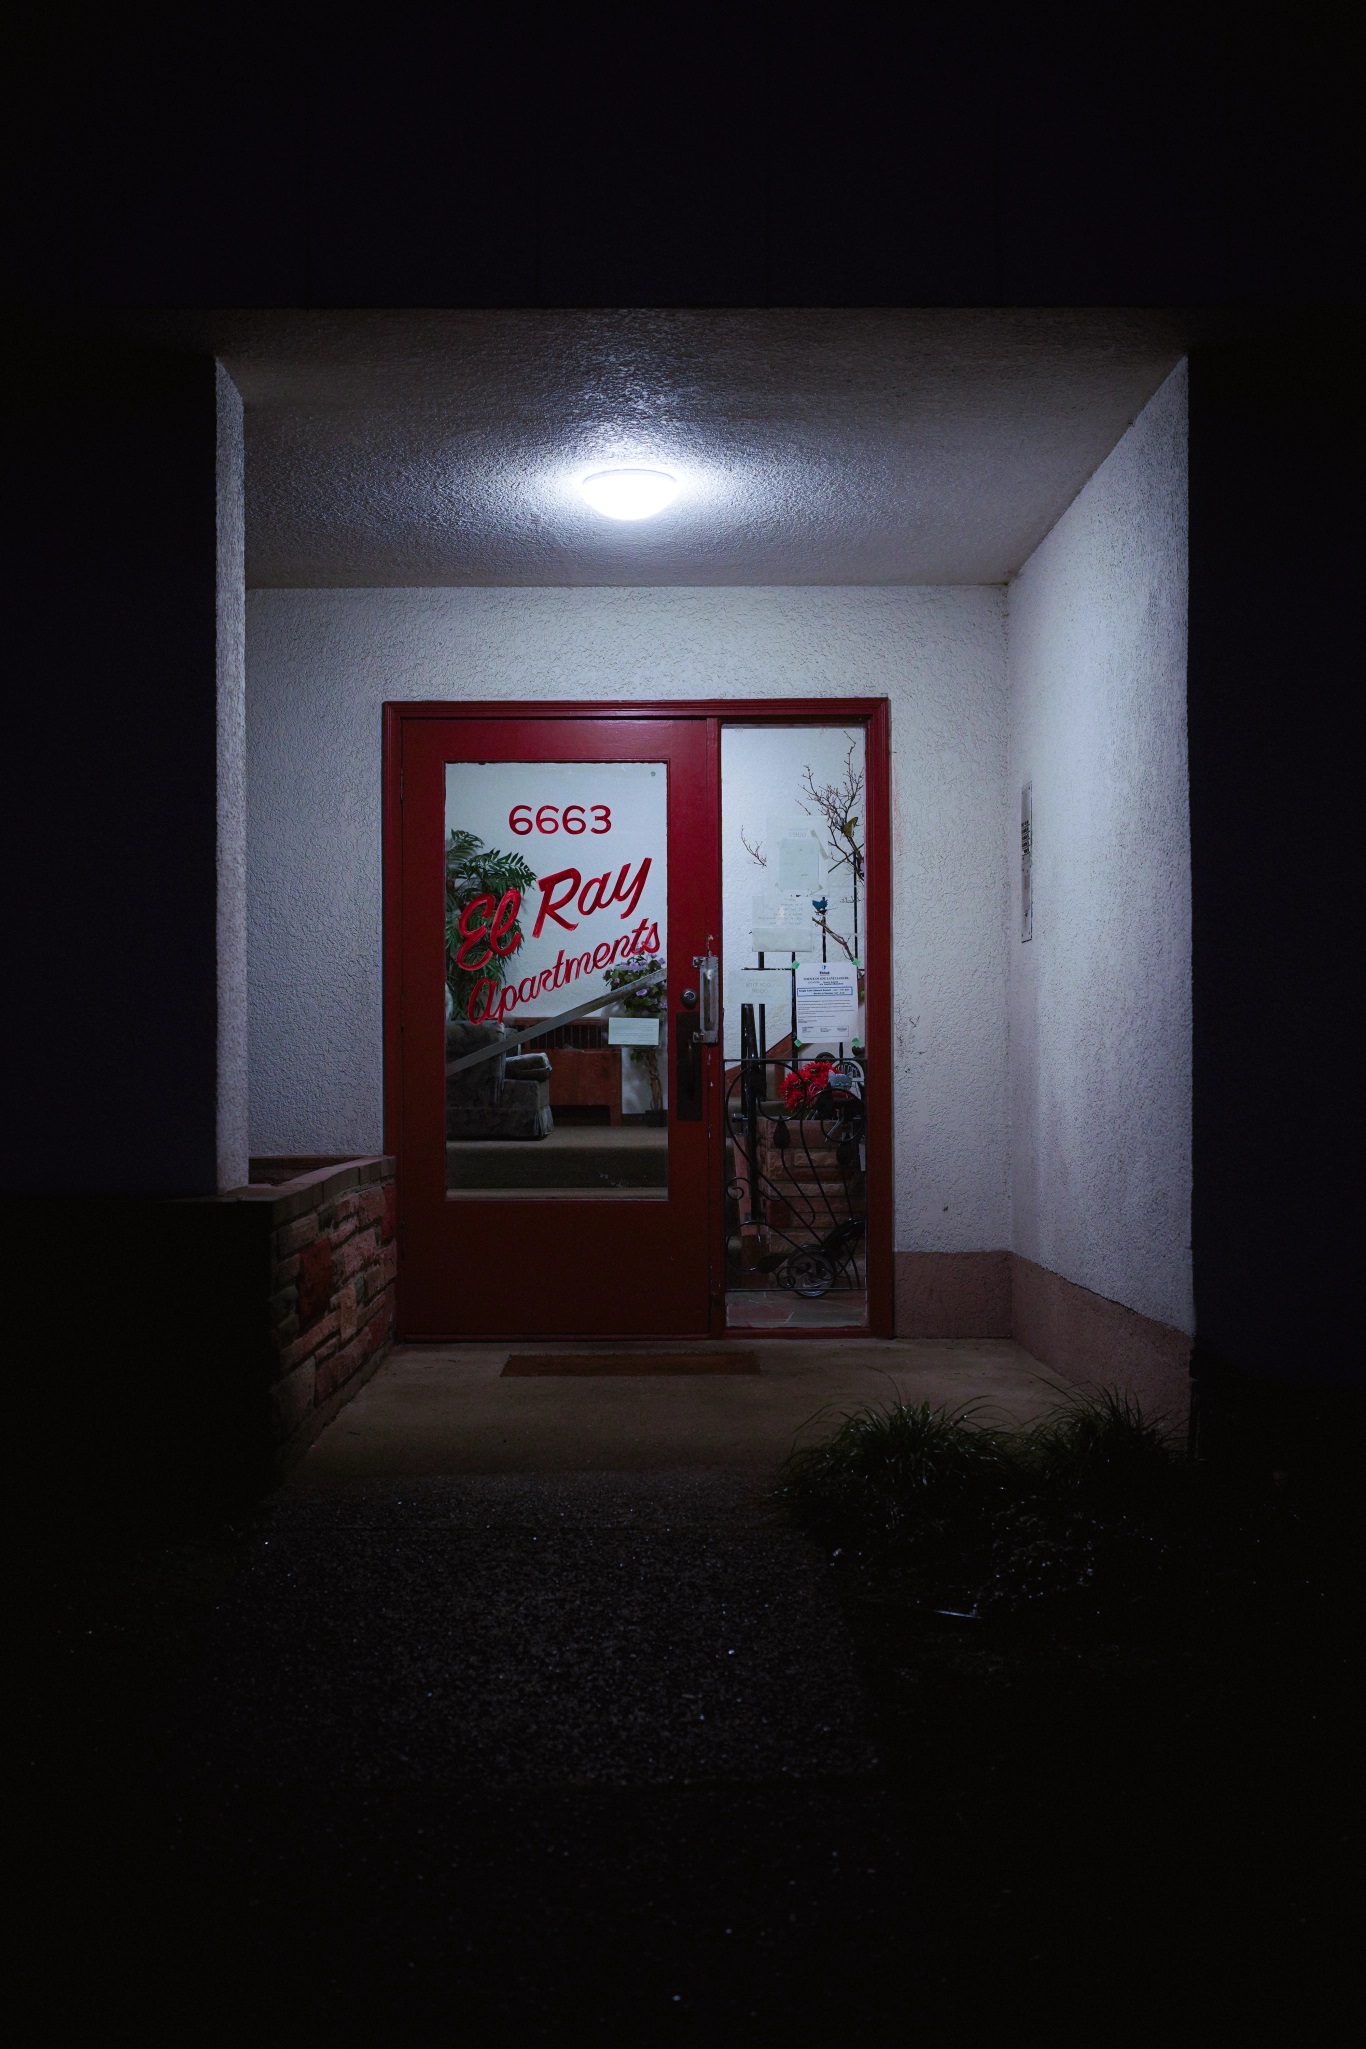 The entryway of an apartment building at night. The walls are stucco. On the door, the name “El Ray Apartments” is painted on in red in beautiful cursive.